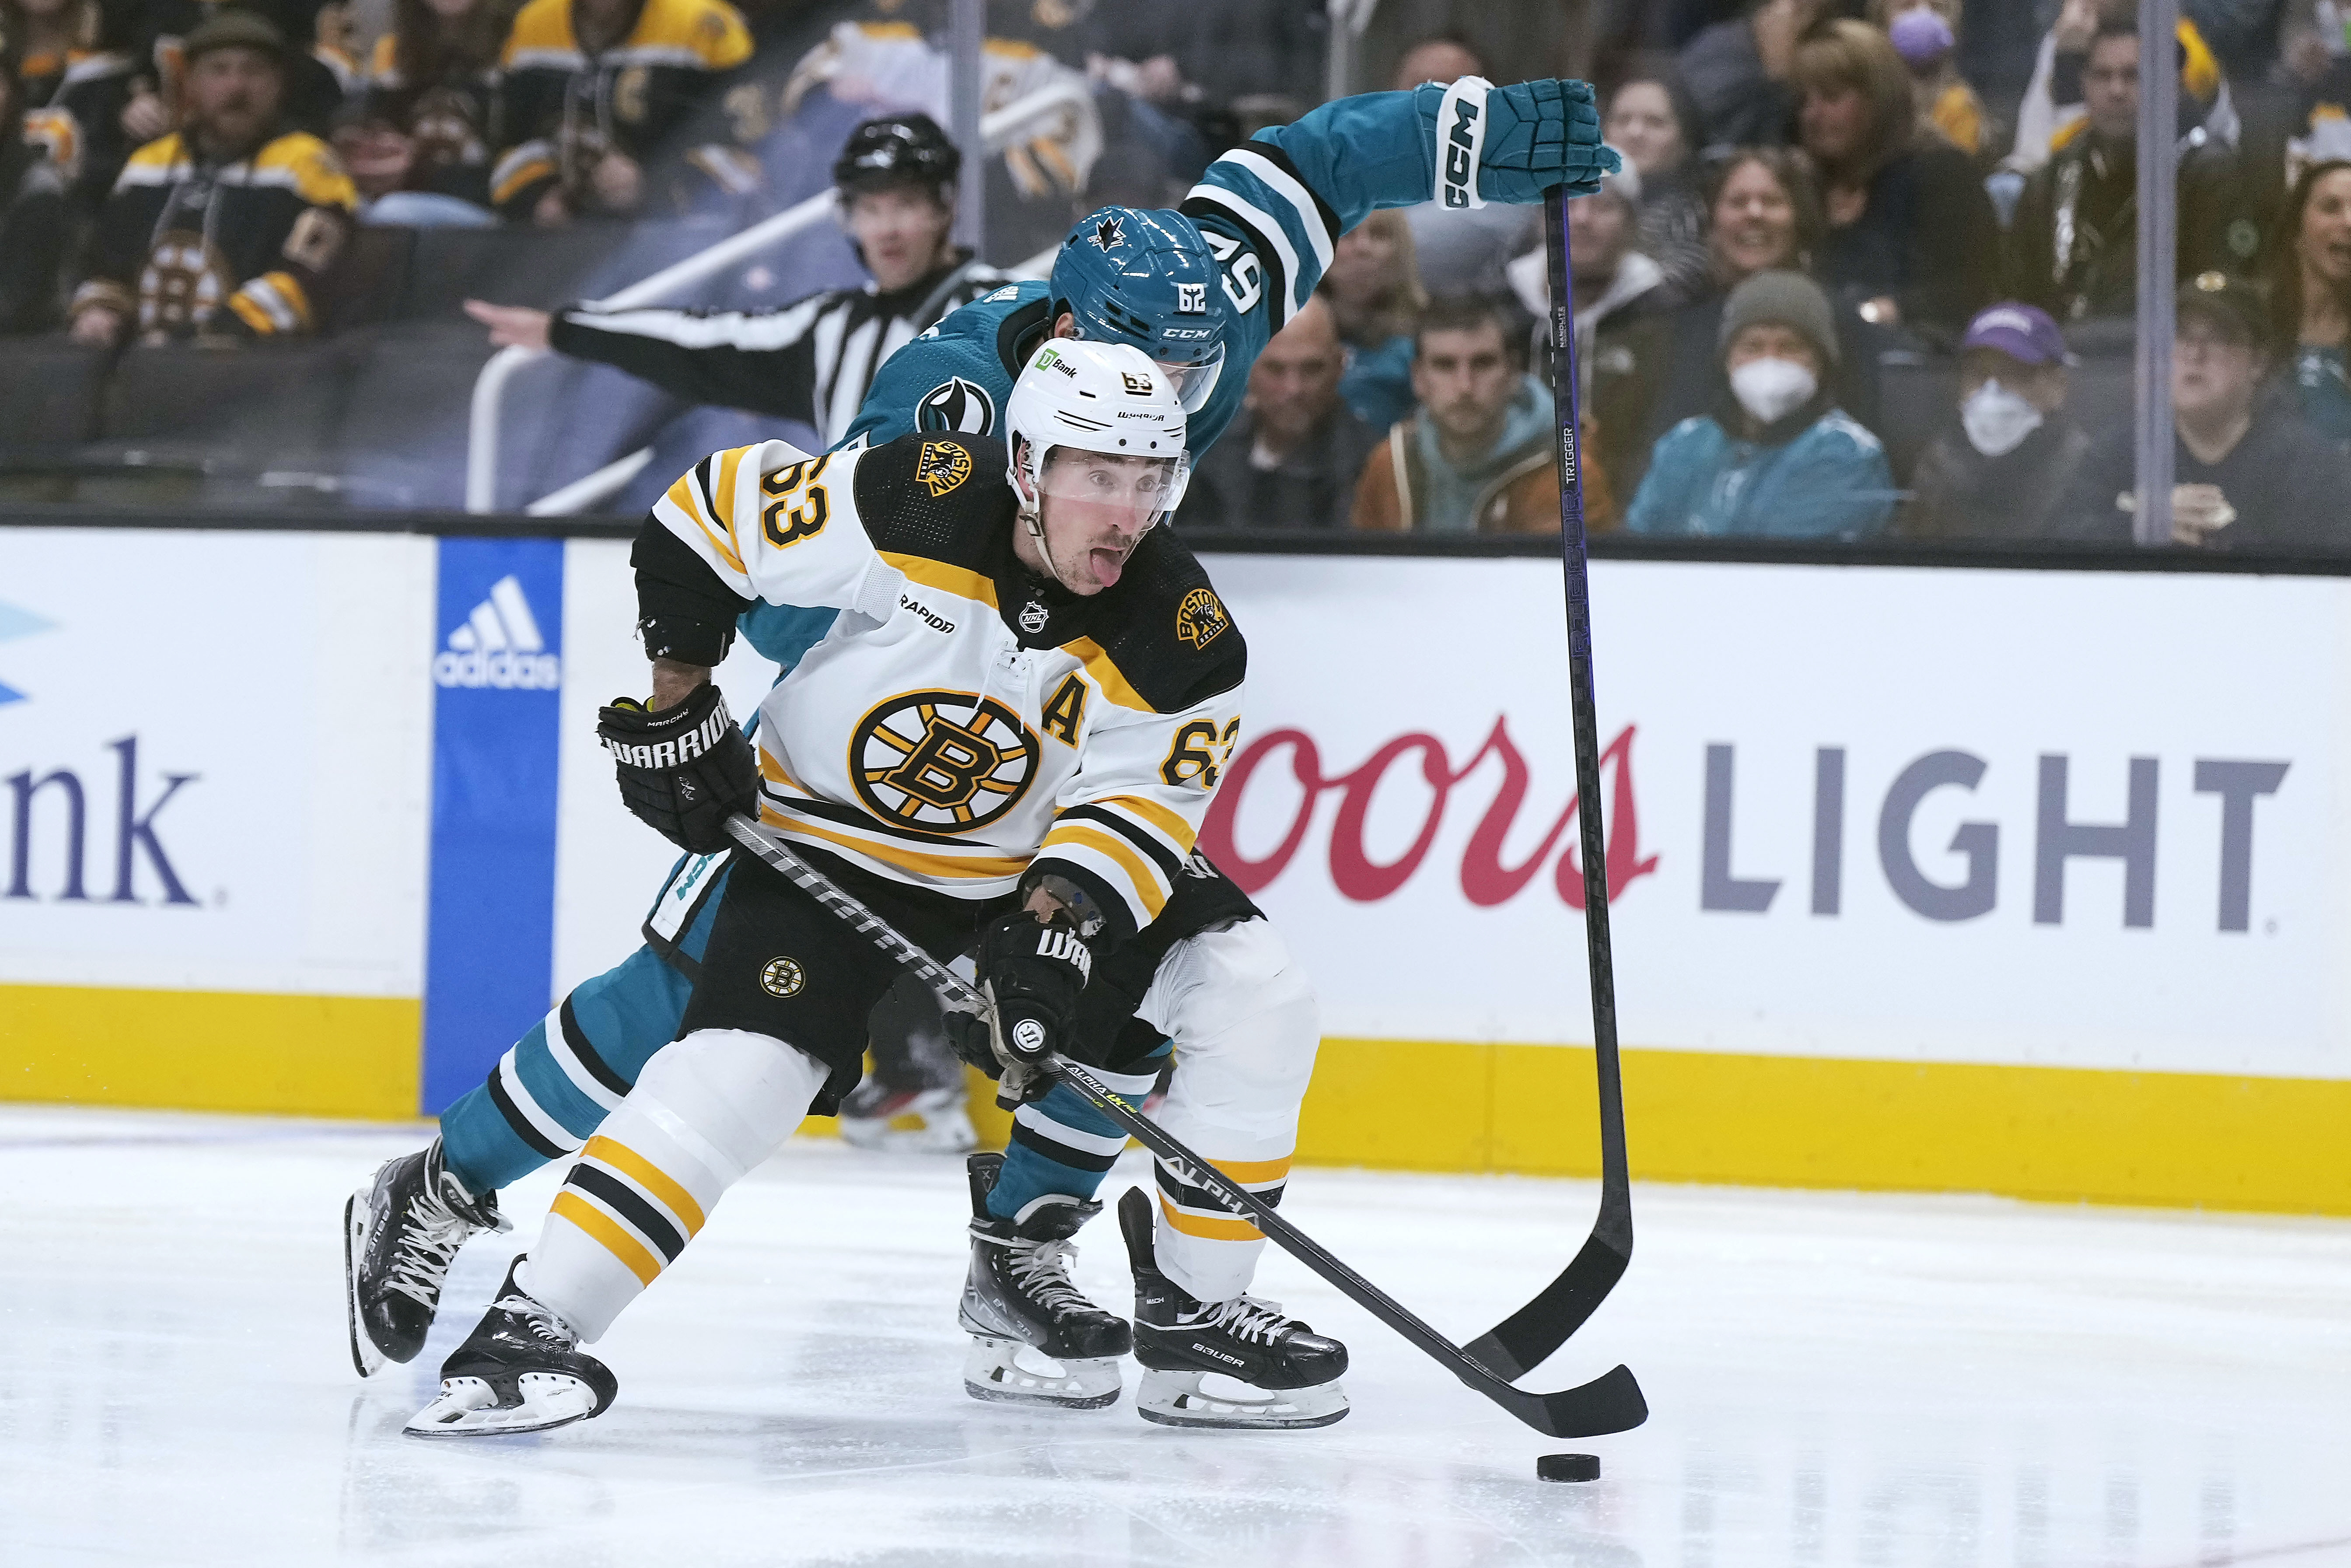 Brad Marchand still a big talker, even closing on 100 points - The